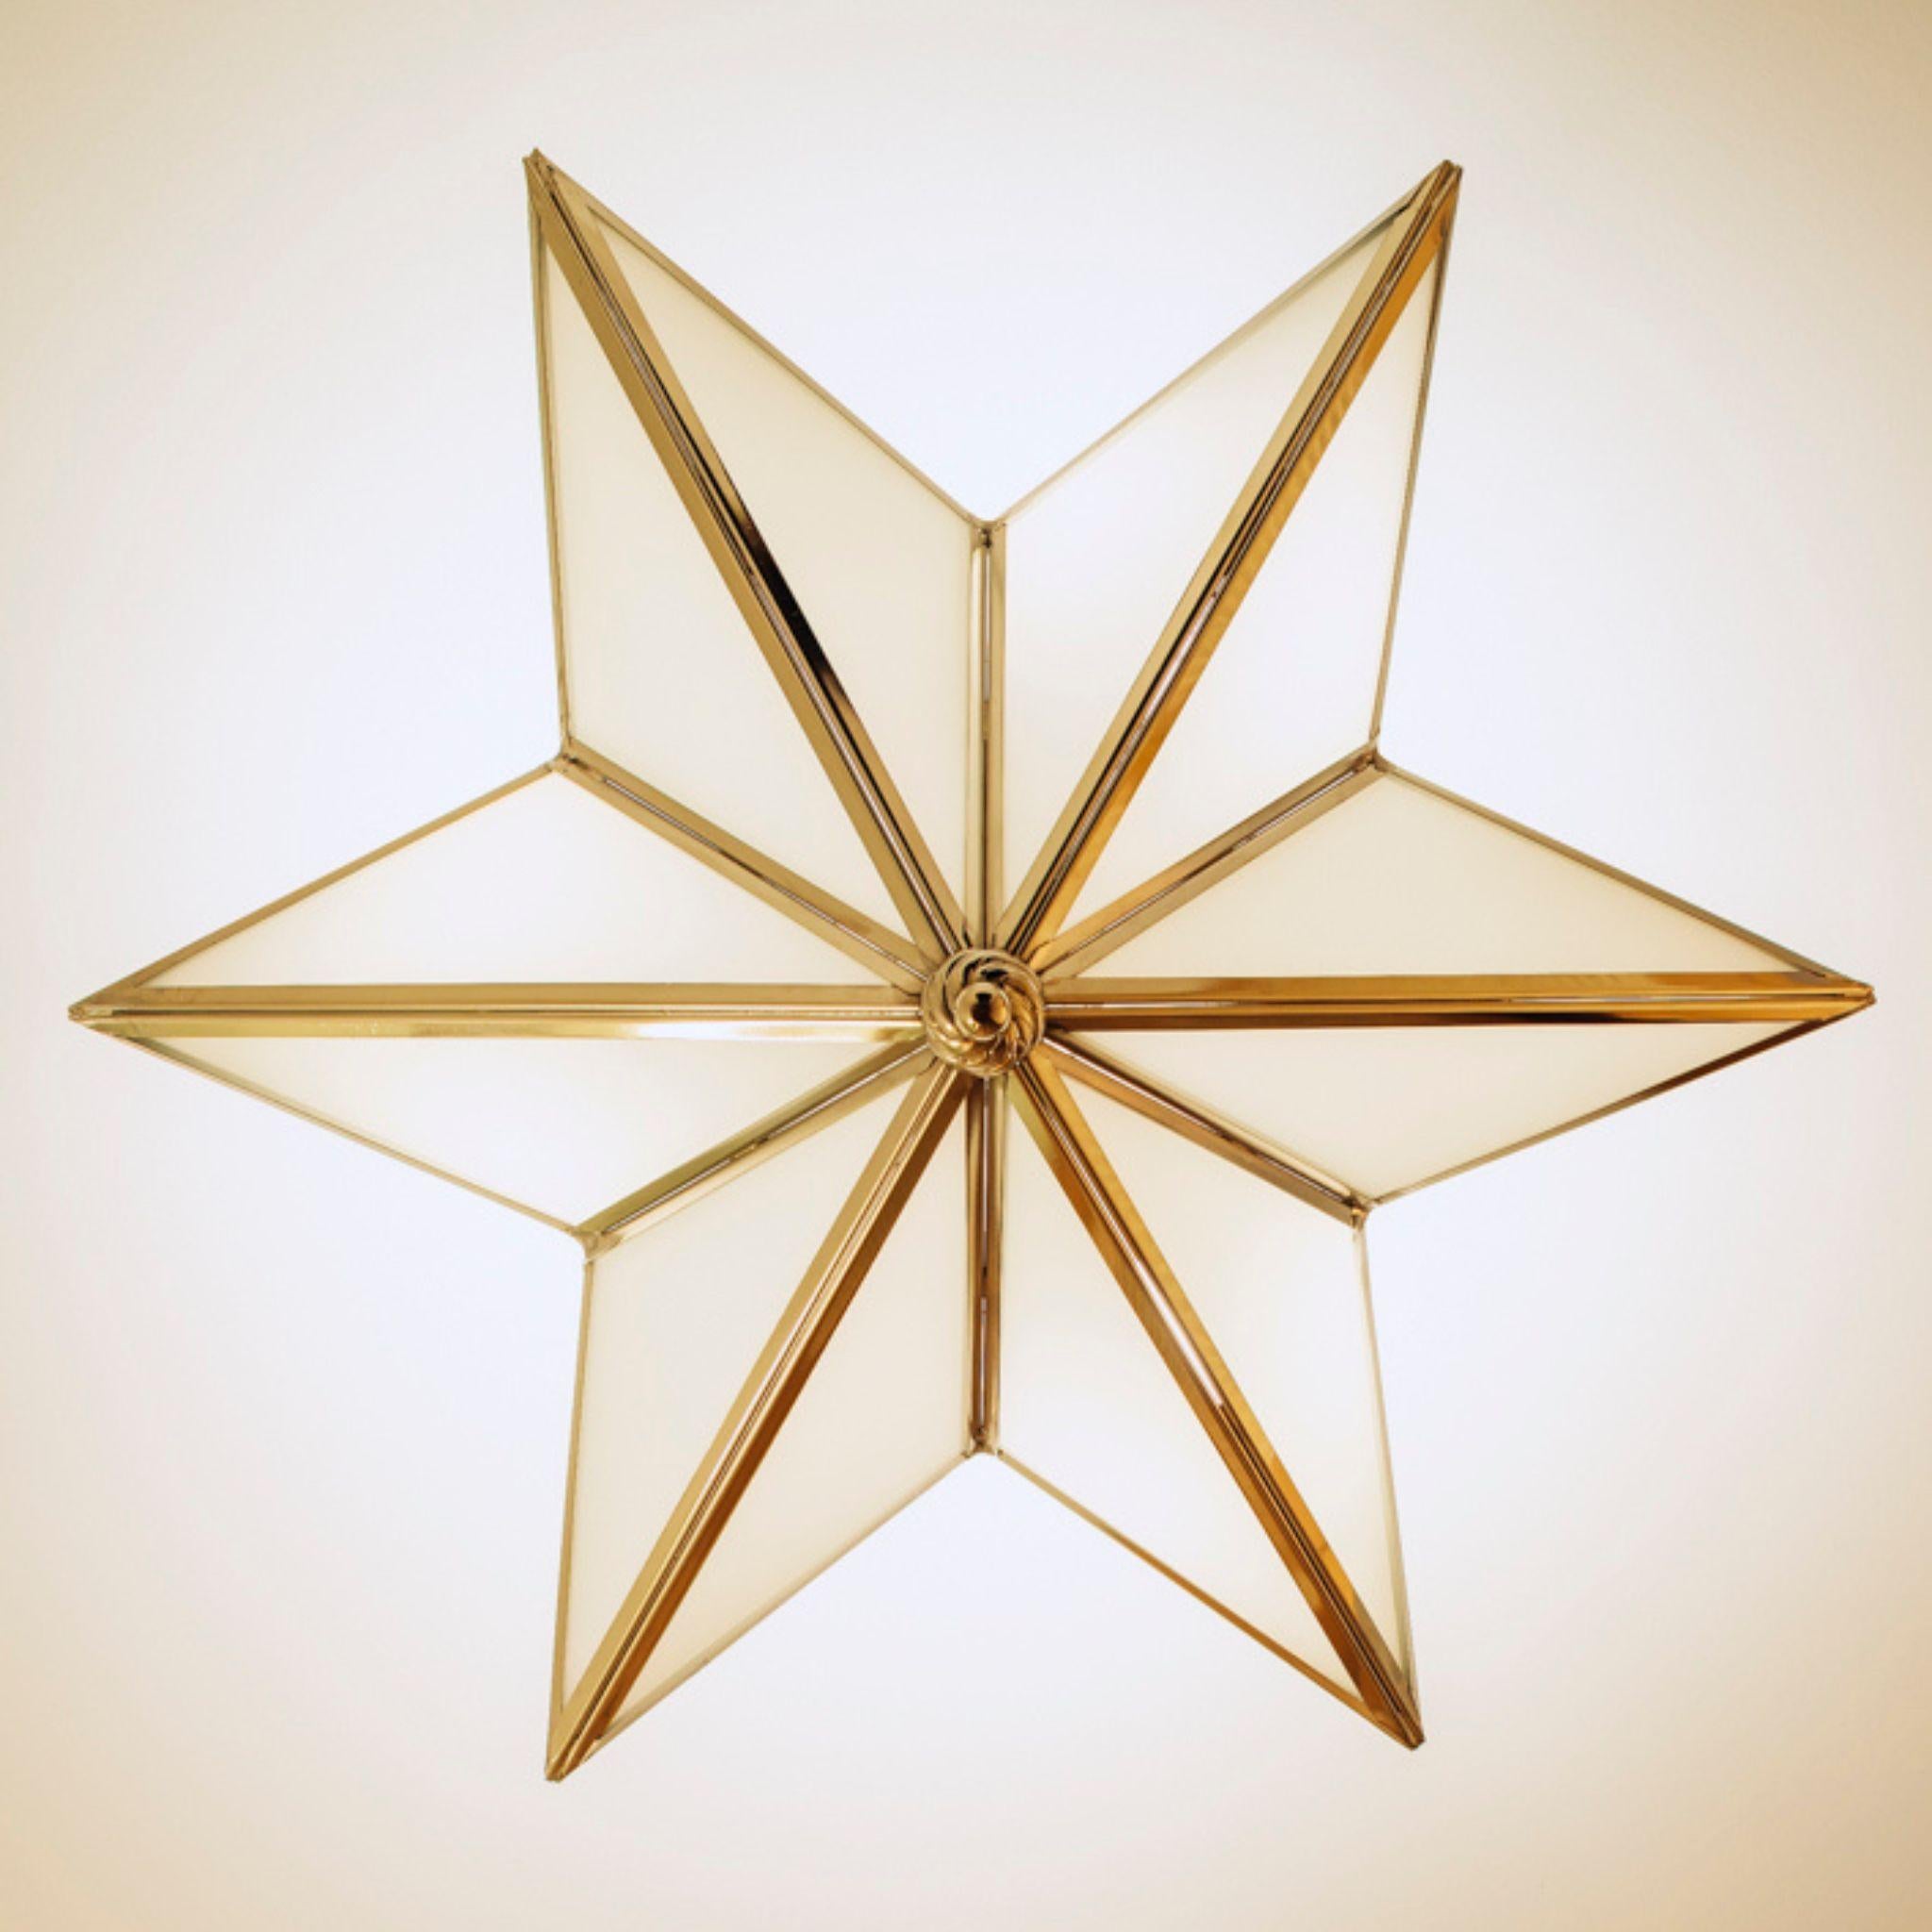 Six Pointed Star Suspension with Brass Structure and Glass In New Condition For Sale In Firenze, FI